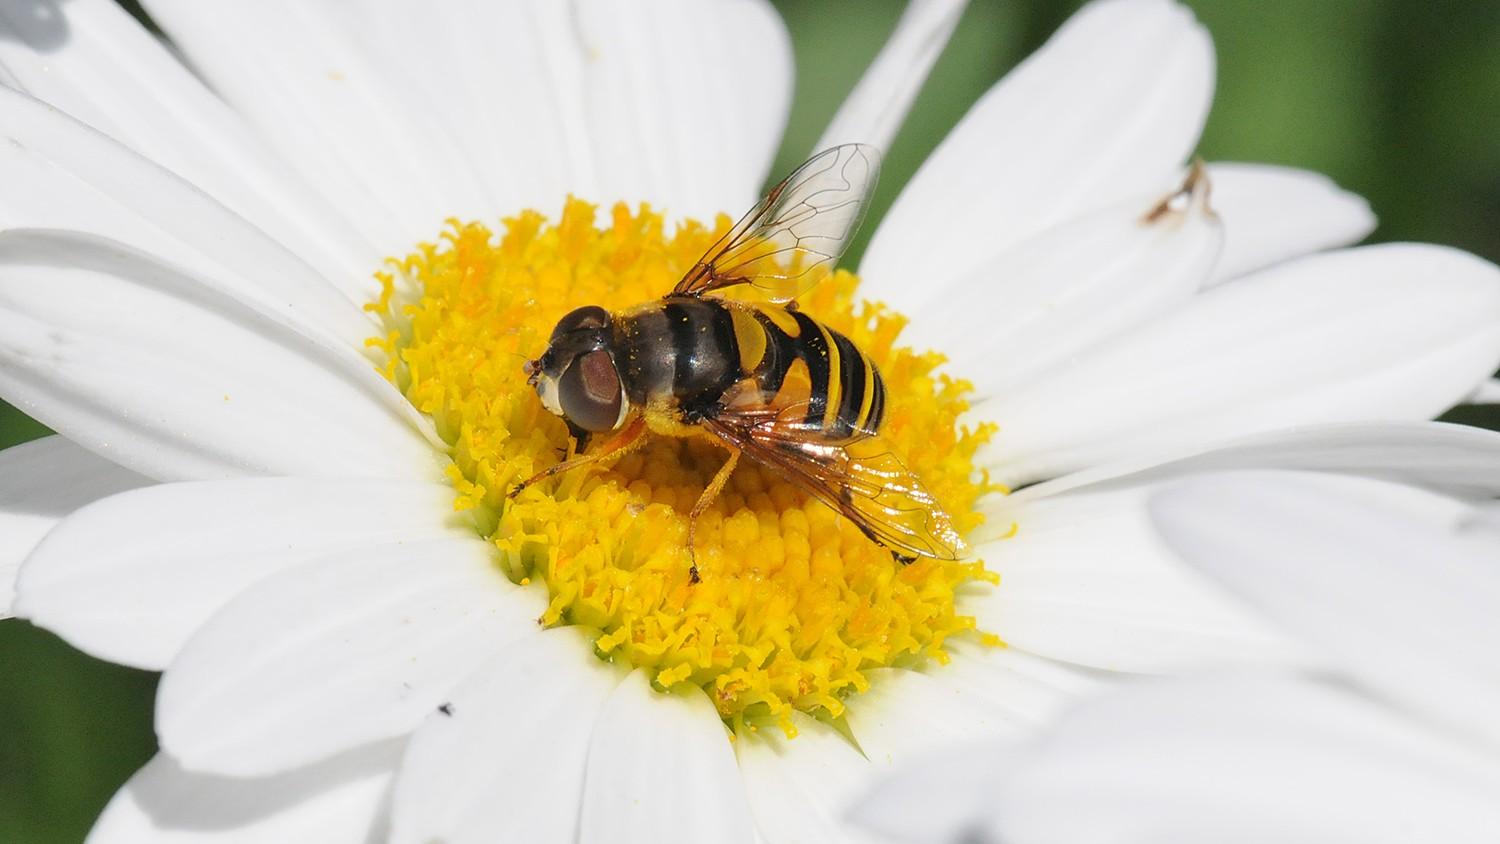 adult flower fly sitting on a white flower